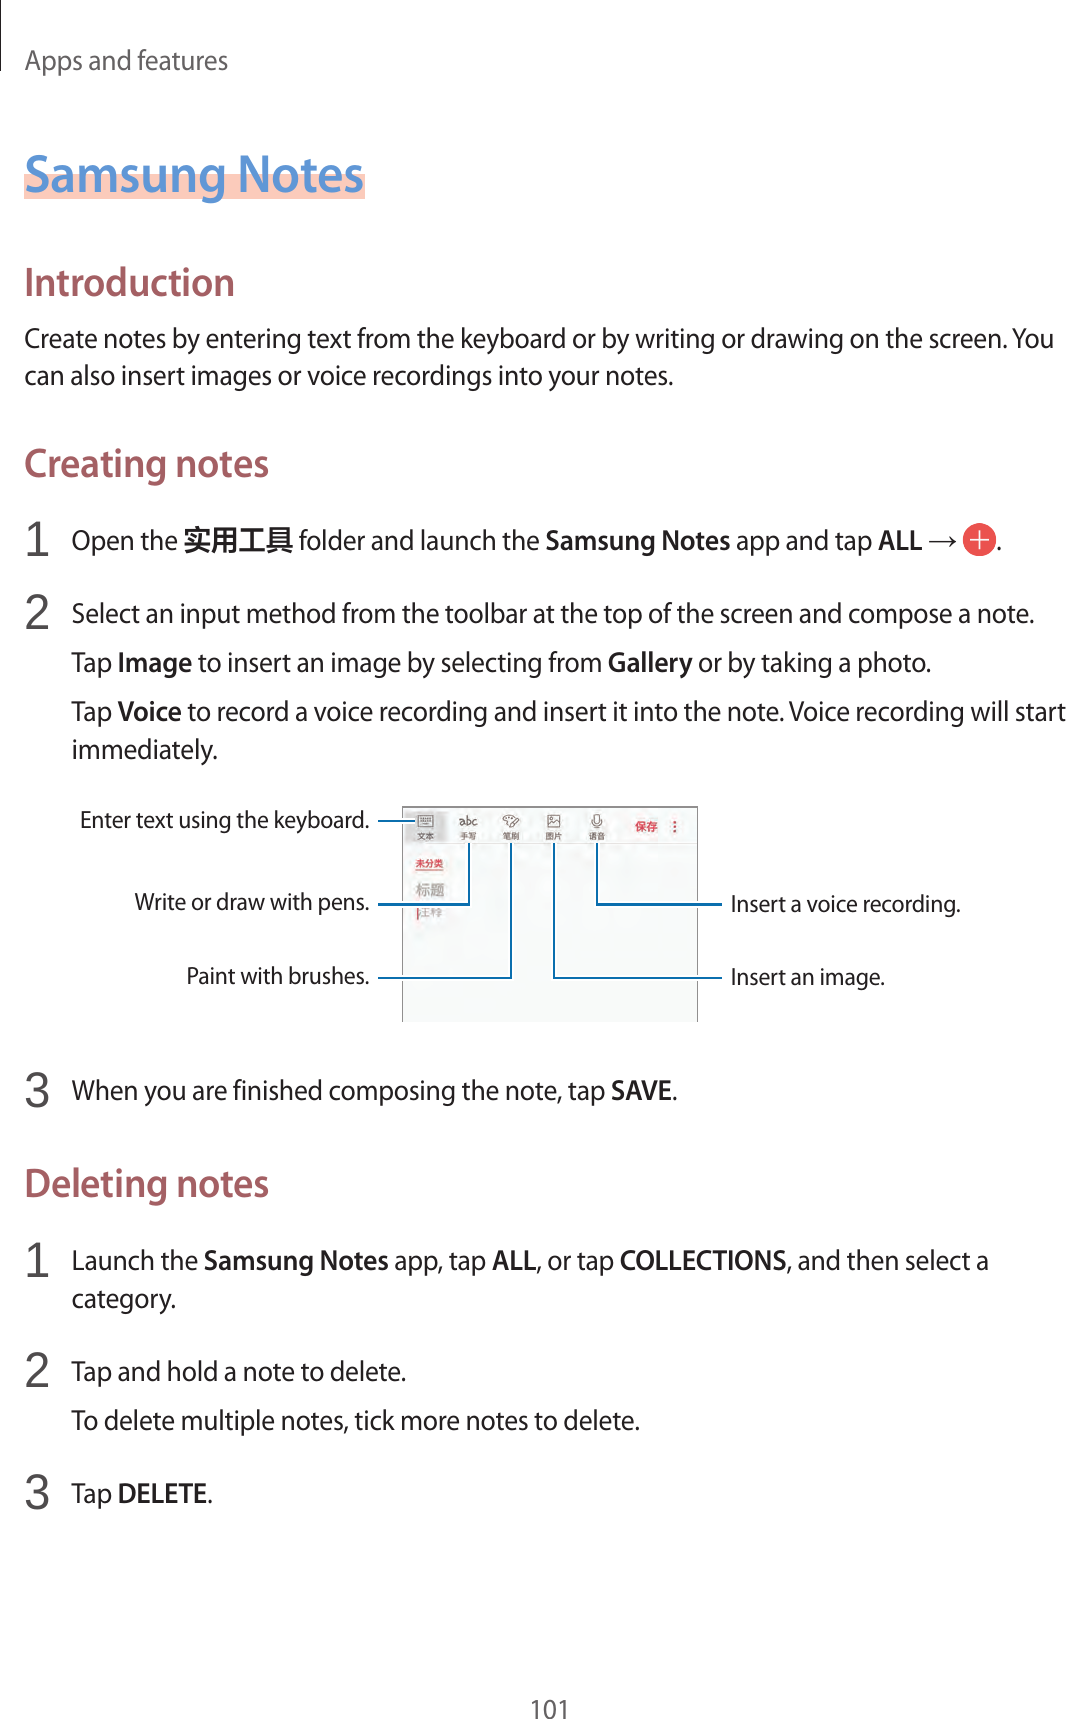 Apps and features101Samsung NotesIntroductionCreate notes by entering text from the keyboard or by writing or drawing on the screen. You can also insert images or voice recordings into your notes.Creating notes1  Open the 实用工具 folder and launch the Samsung Notes app and tap ALL →  .2  Select an input method from the toolbar at the top of the screen and compose a note.Tap Image to insert an image by selecting from Gallery or by taking a photo.Tap Voice to record a voice recording and insert it into the note. Voice recording will start immediately.Enter text using the keyboard.Write or draw with pens.Paint with brushes.Insert a voice recording.Insert an image.3  When you are finished composing the note, tap SAVE.Deleting notes1  Launch the Samsung Notes app, tap ALL, or tap COLLECTIONS, and then select a category.2  Tap and hold a note to delete.To delete multiple notes, tick more notes to delete.3  Tap DELETE.